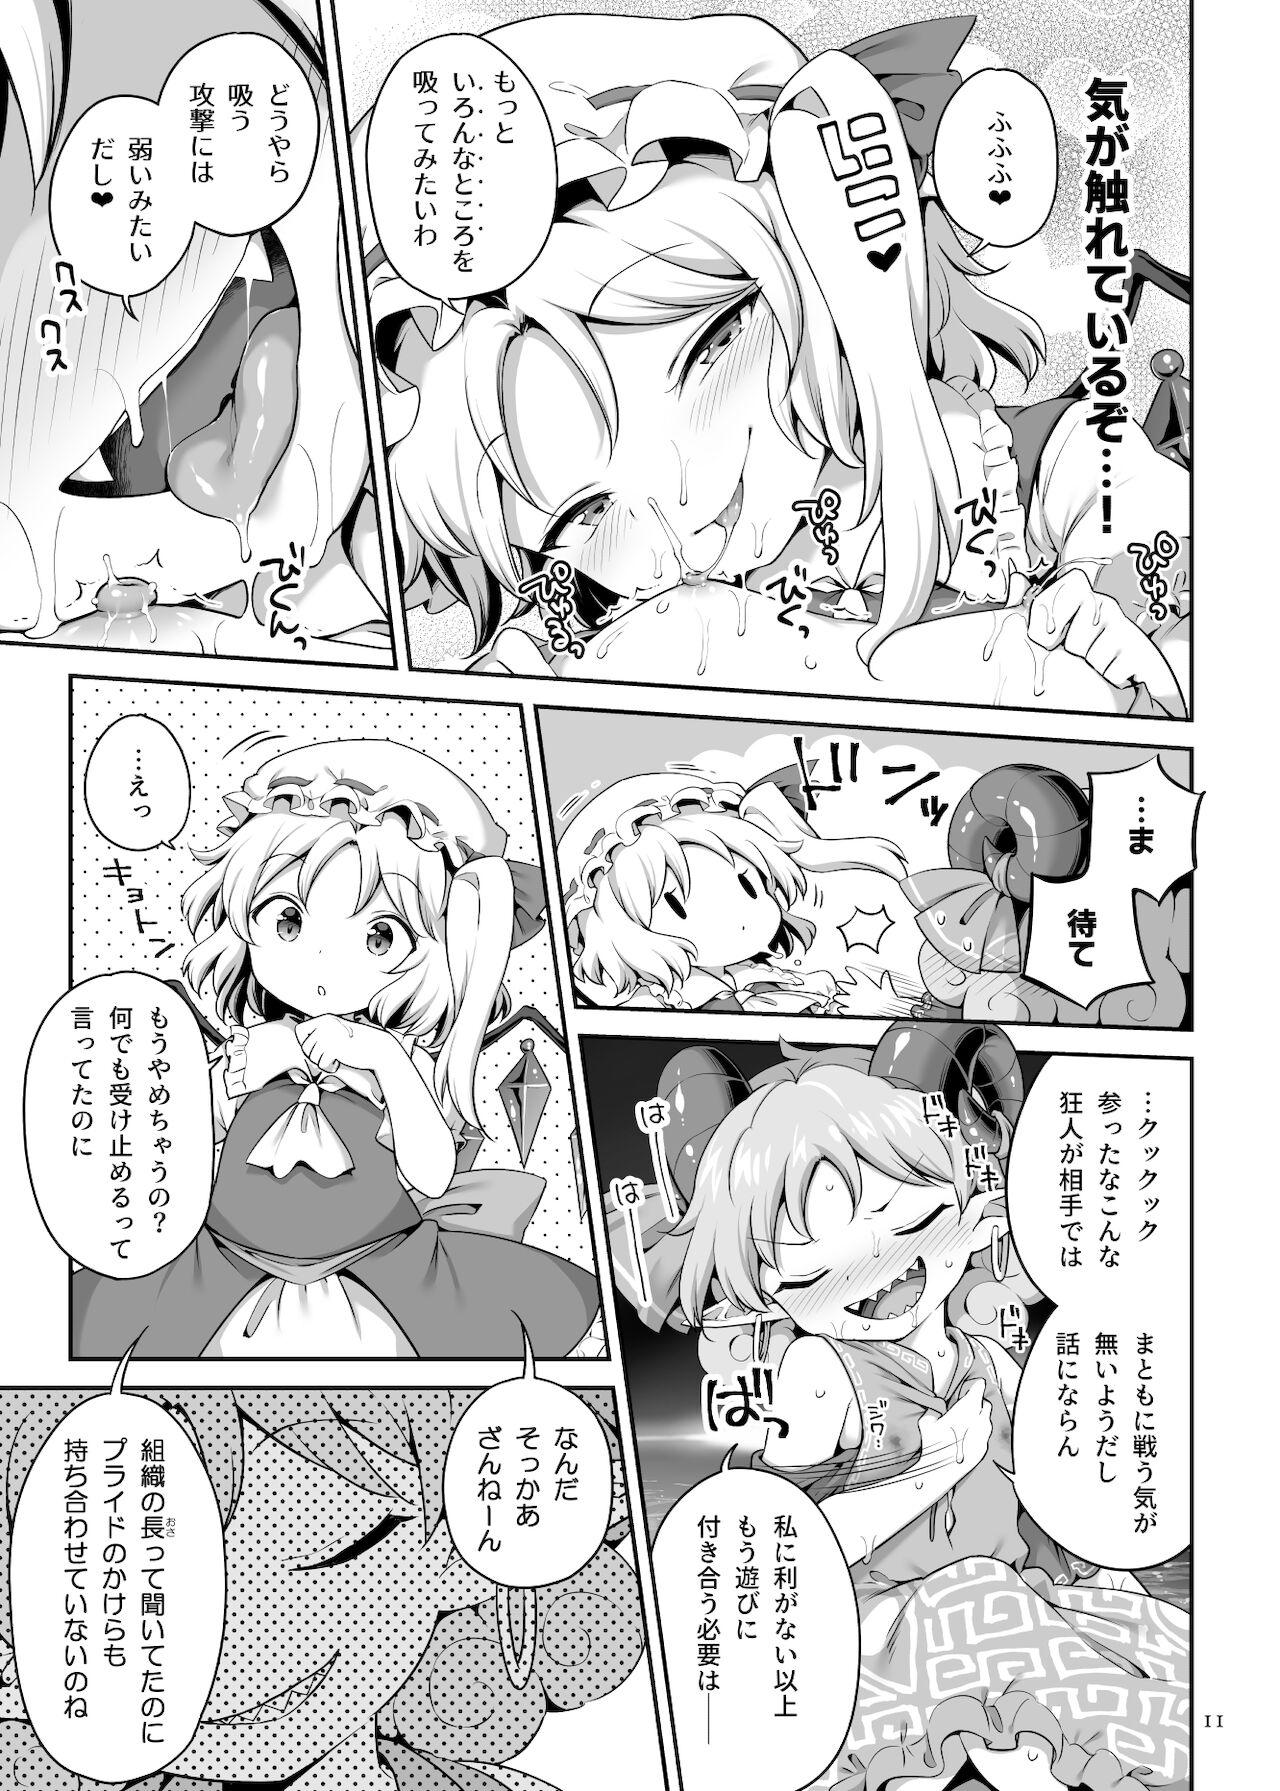 Cock Suckers 吸われて駄目なら吸ってみろ! - Touhou project Transex - Page 11